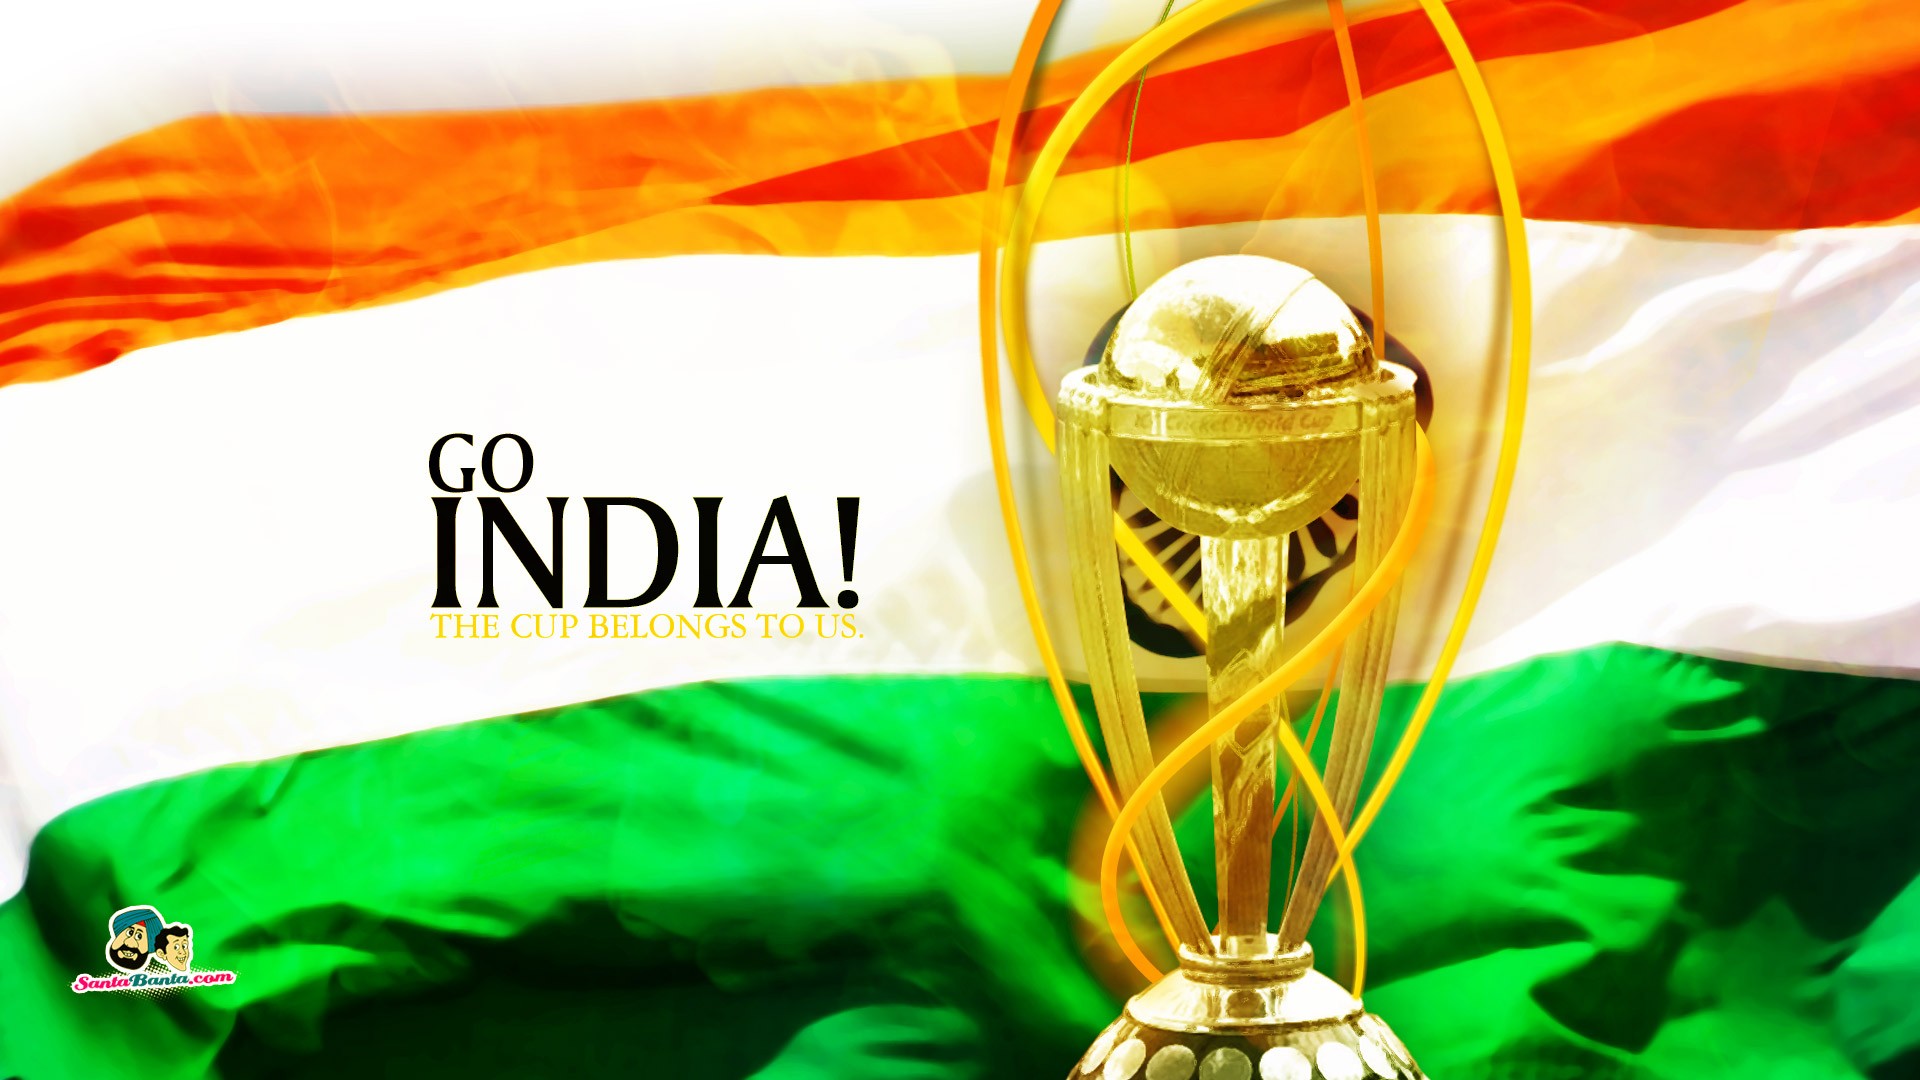 Download the India Cricket Cup Wallpaper, India Cricket Cup iPhone